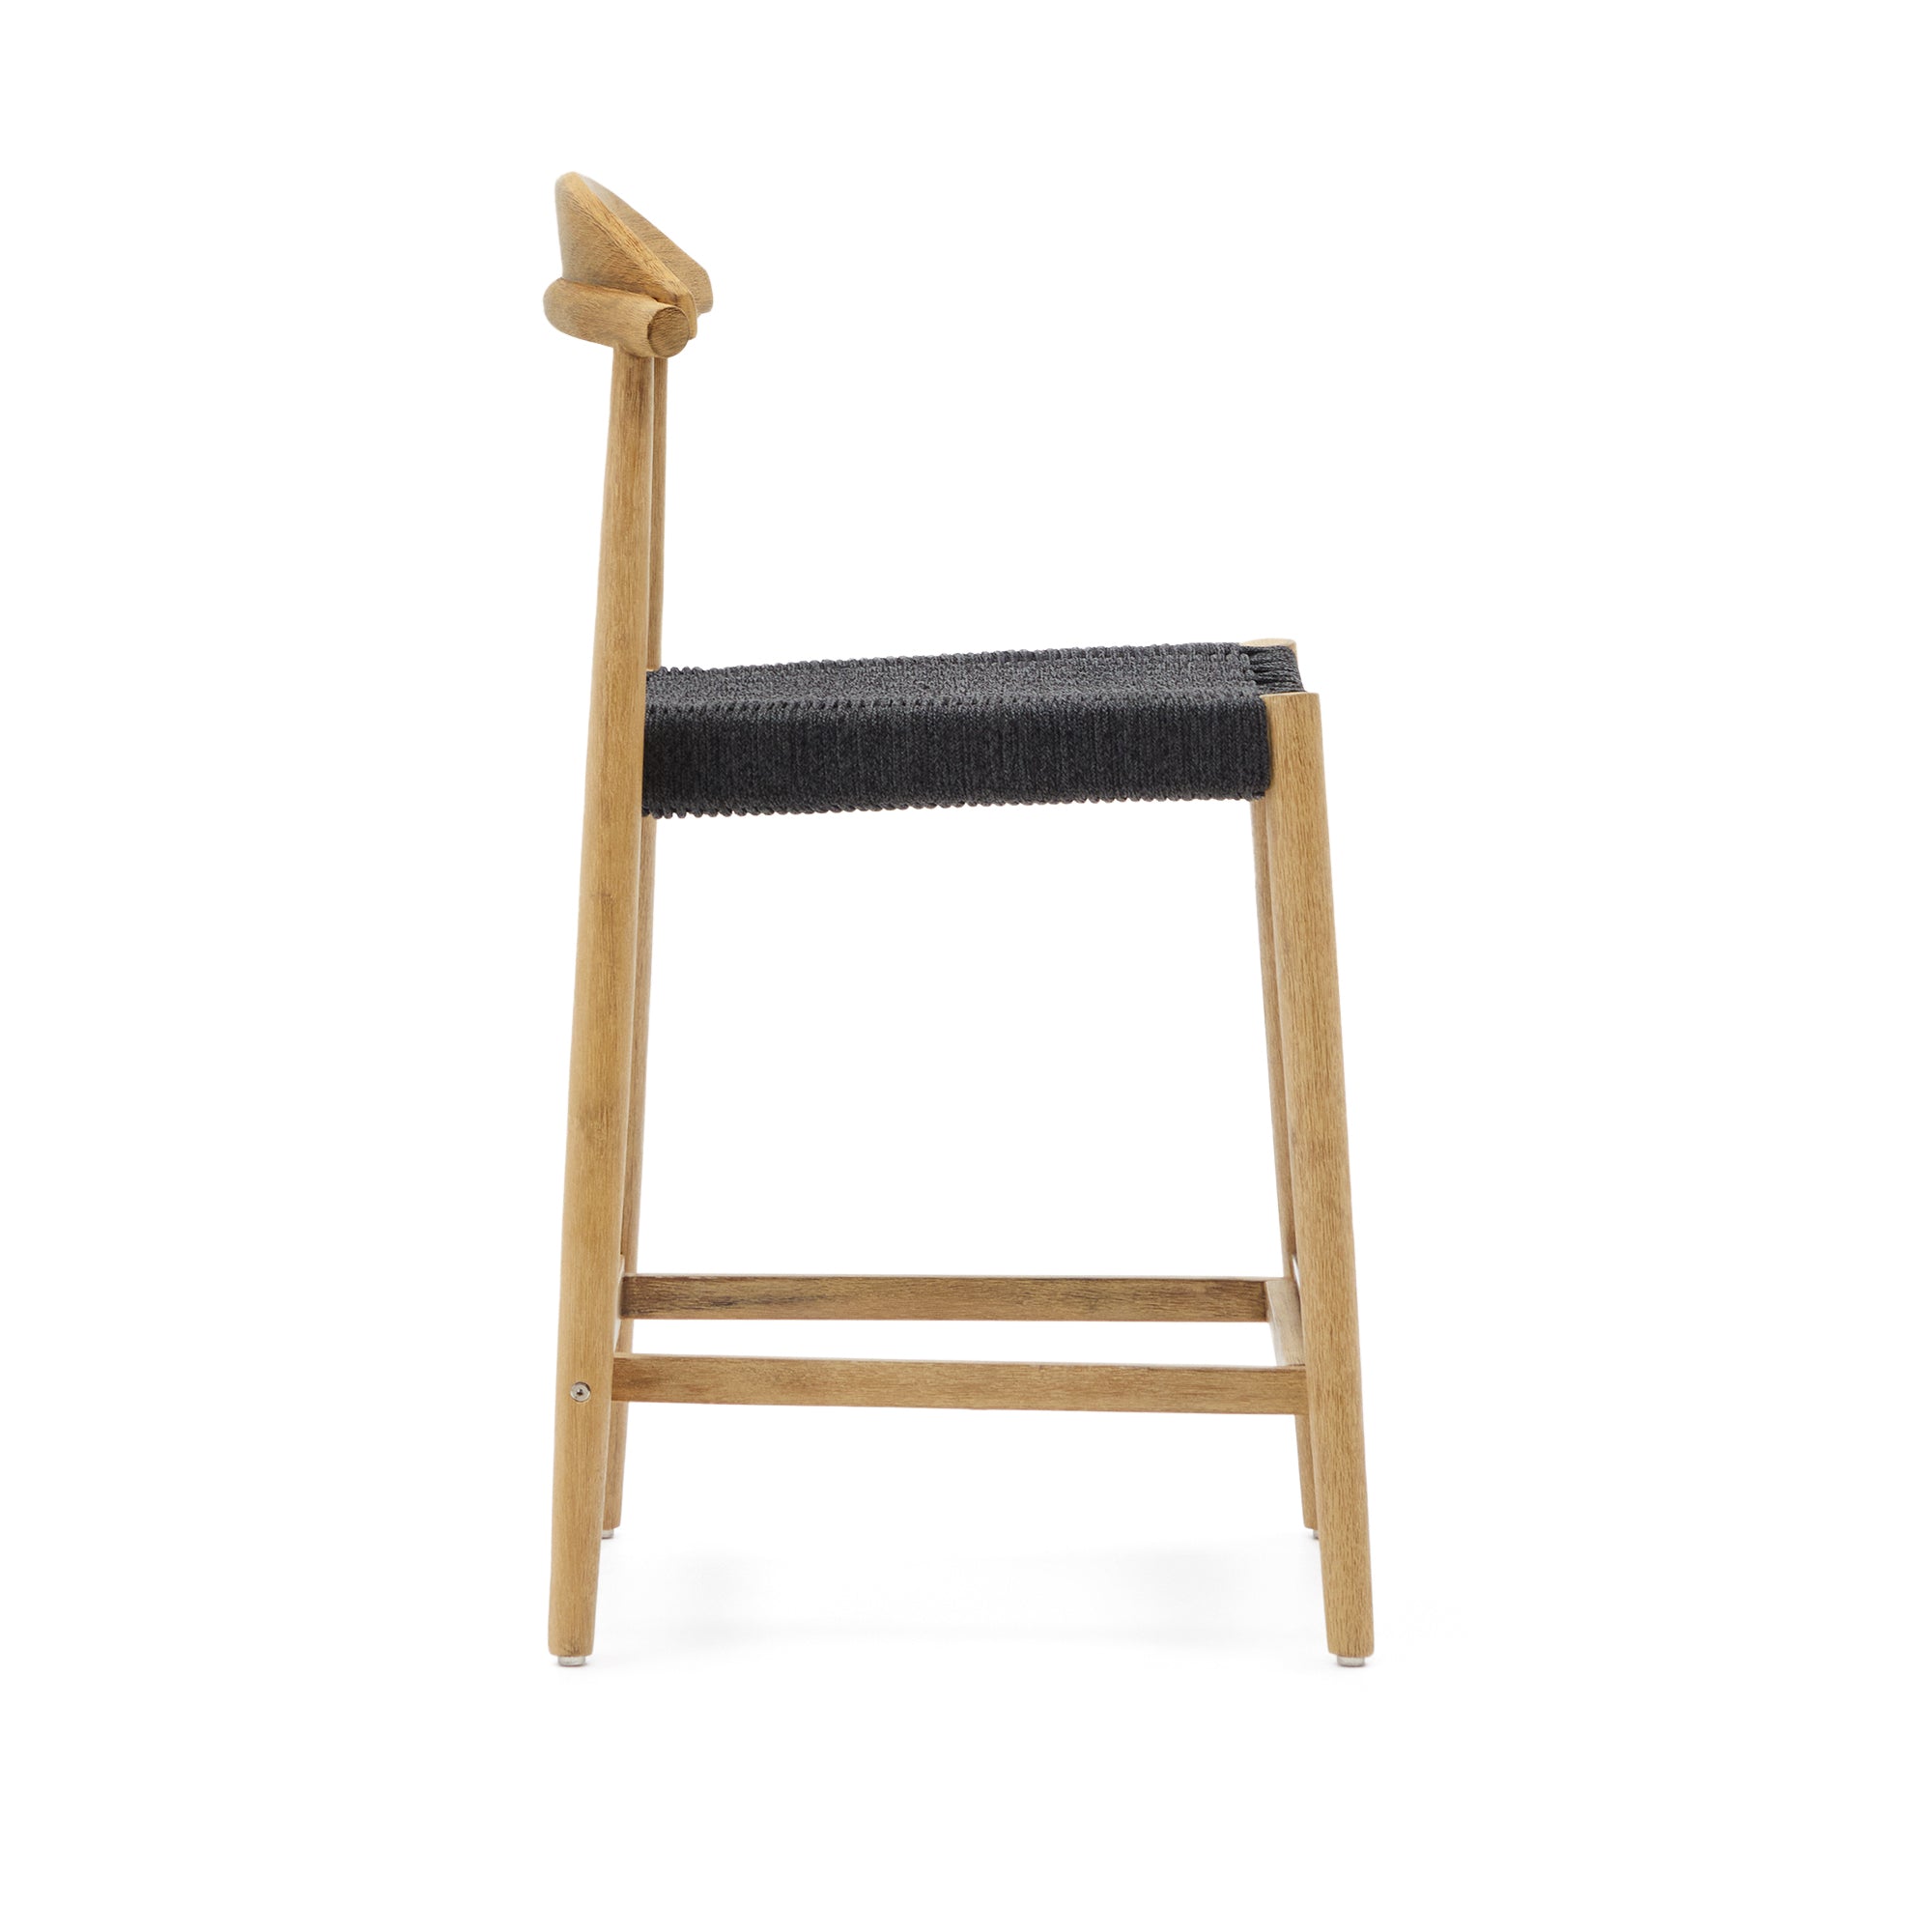 Nina chair, made of solid acacia wood, natural finish and black rope, height 62 cm